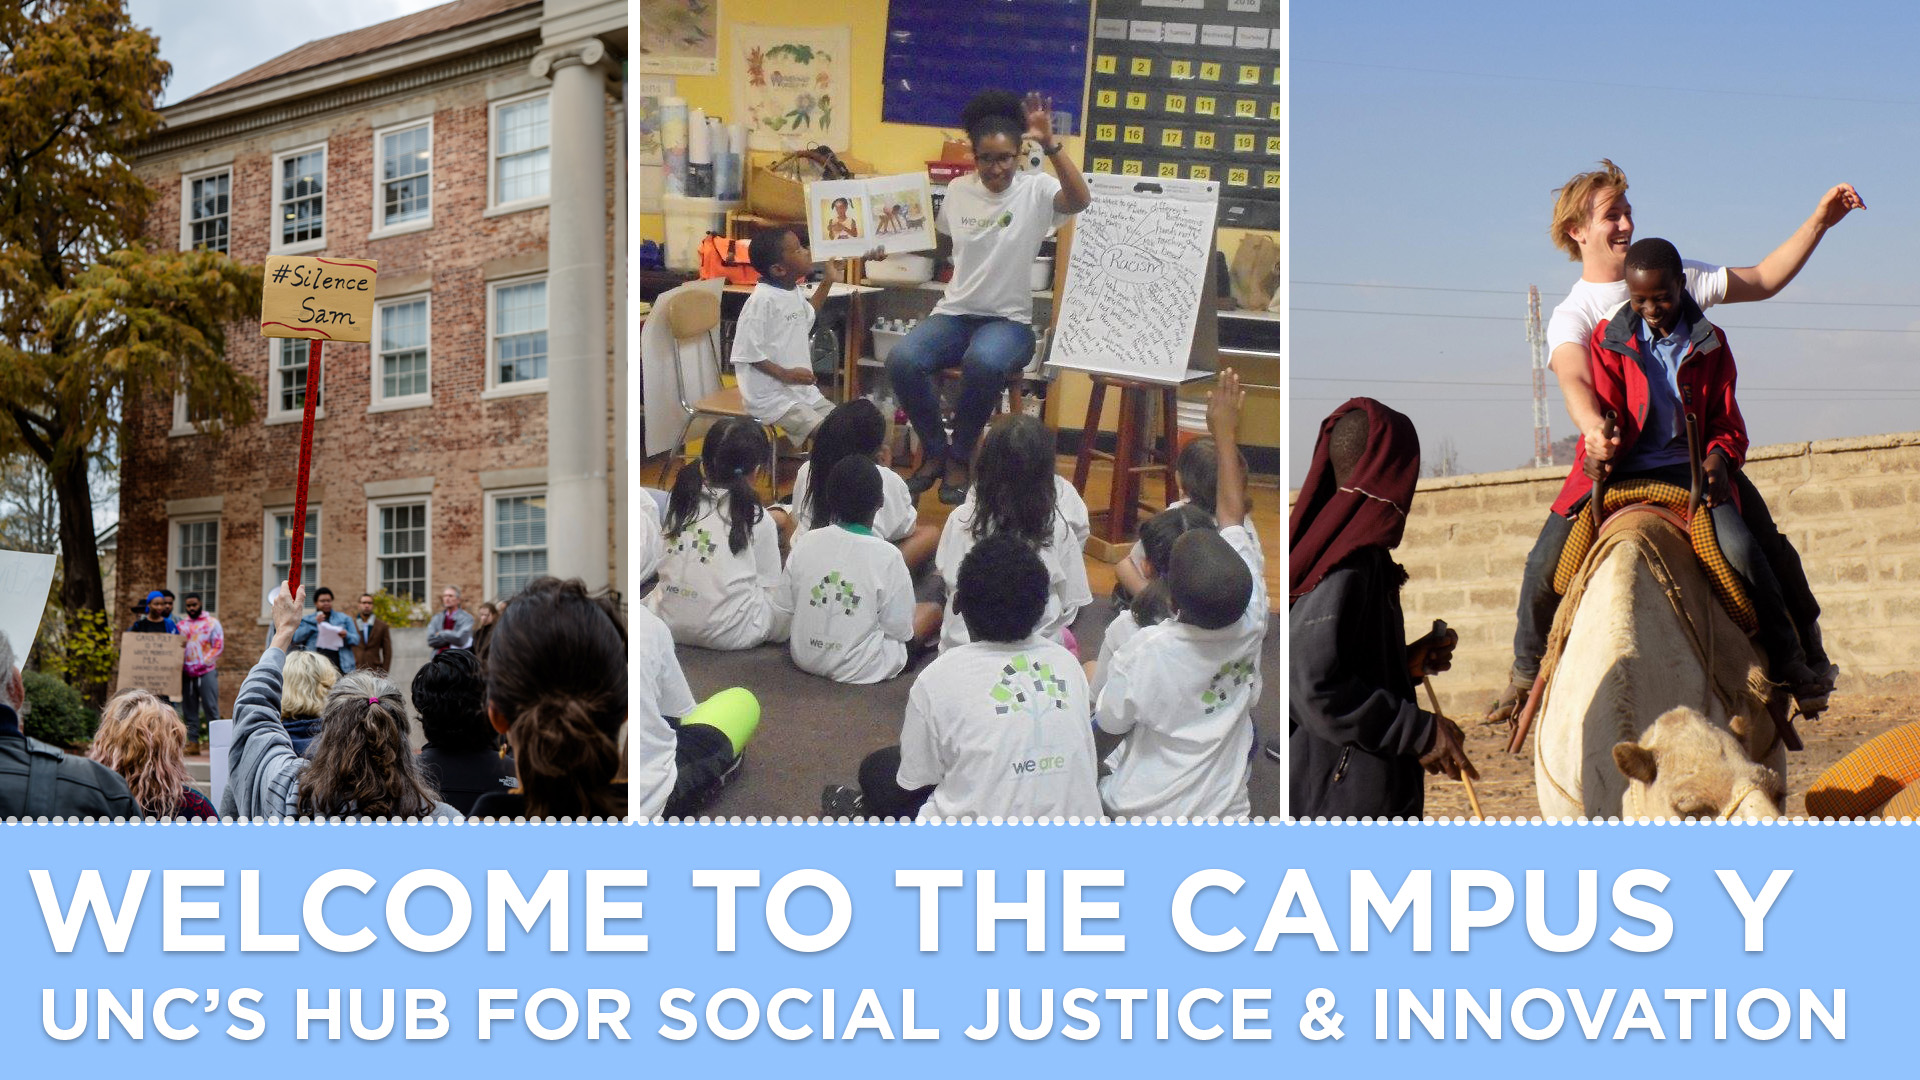 Welcome to the Campus Y, UNC's Hub for Social Justice & Innovation